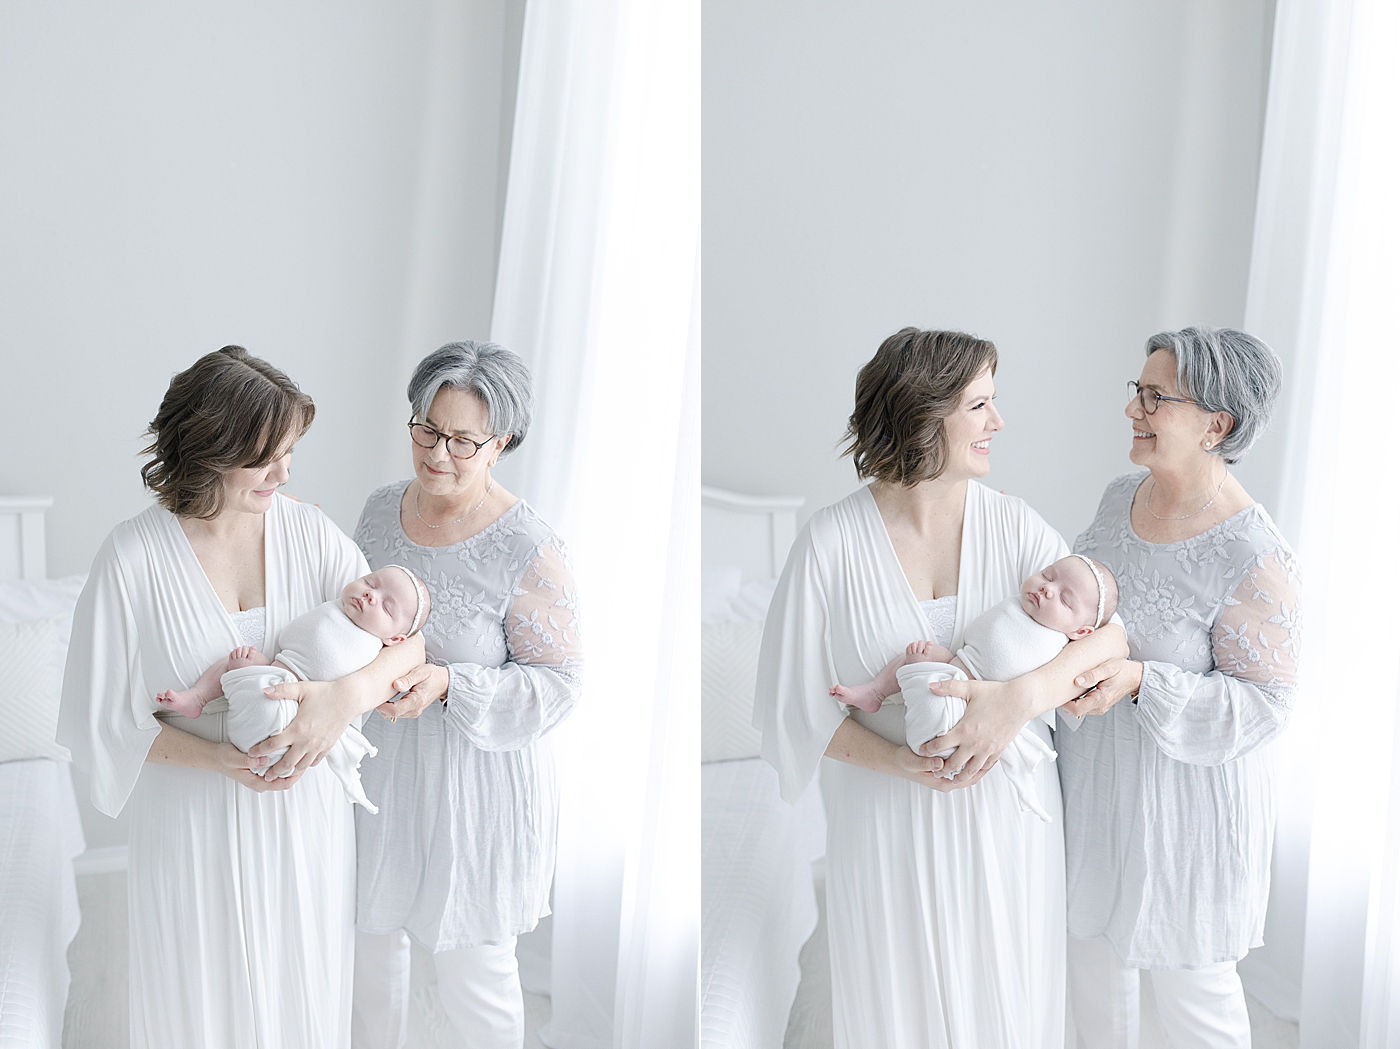 Mom, grandma, and baby girl in a family photo in studio | Photo by Little Sunshine Photography 